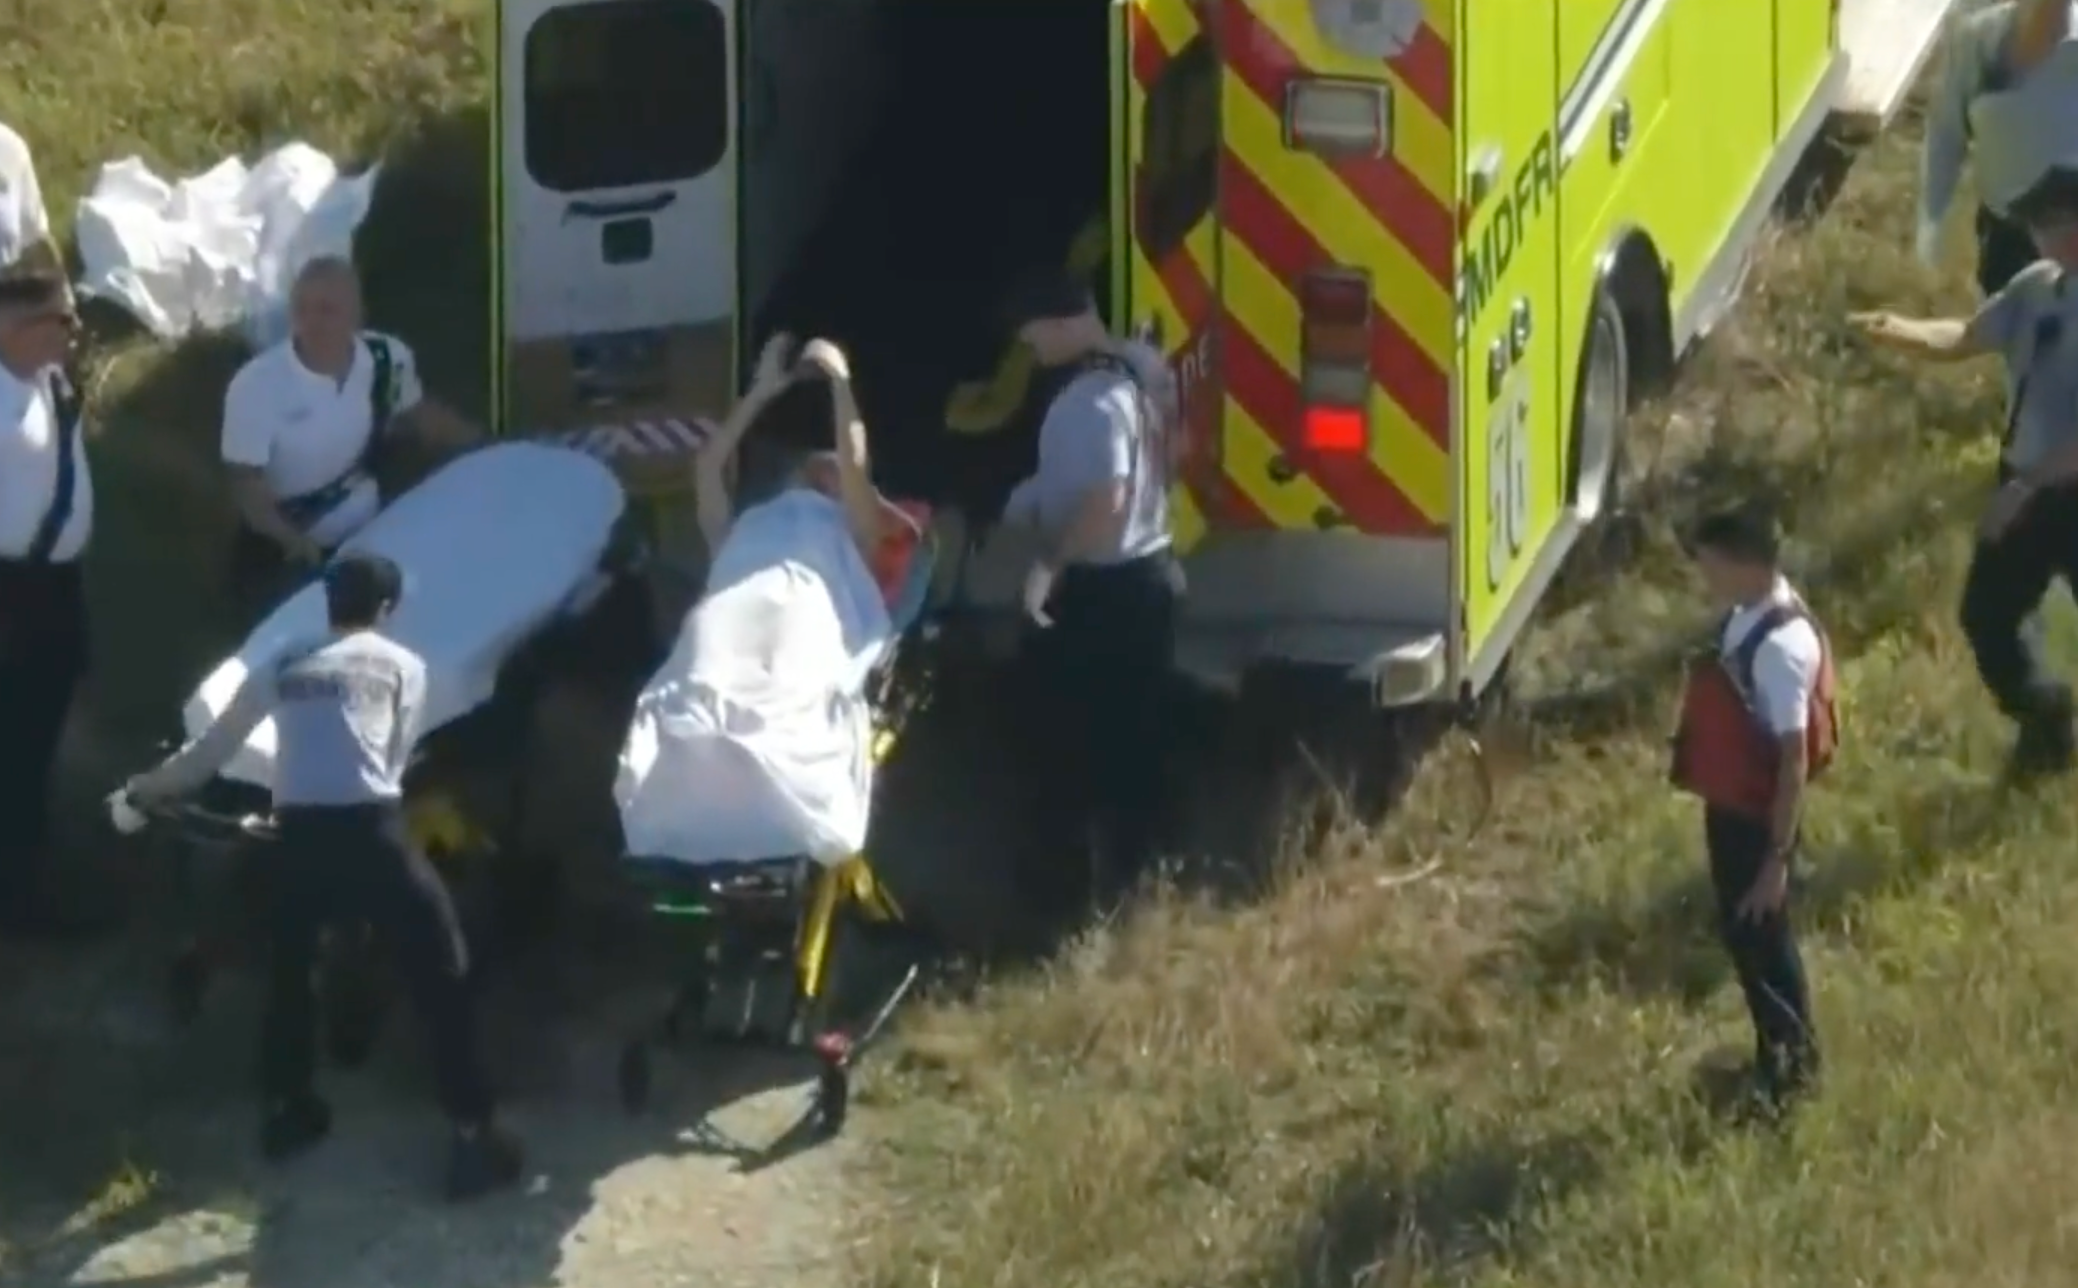 A woman who was involved in the crash survived and was taken away in an ambulance